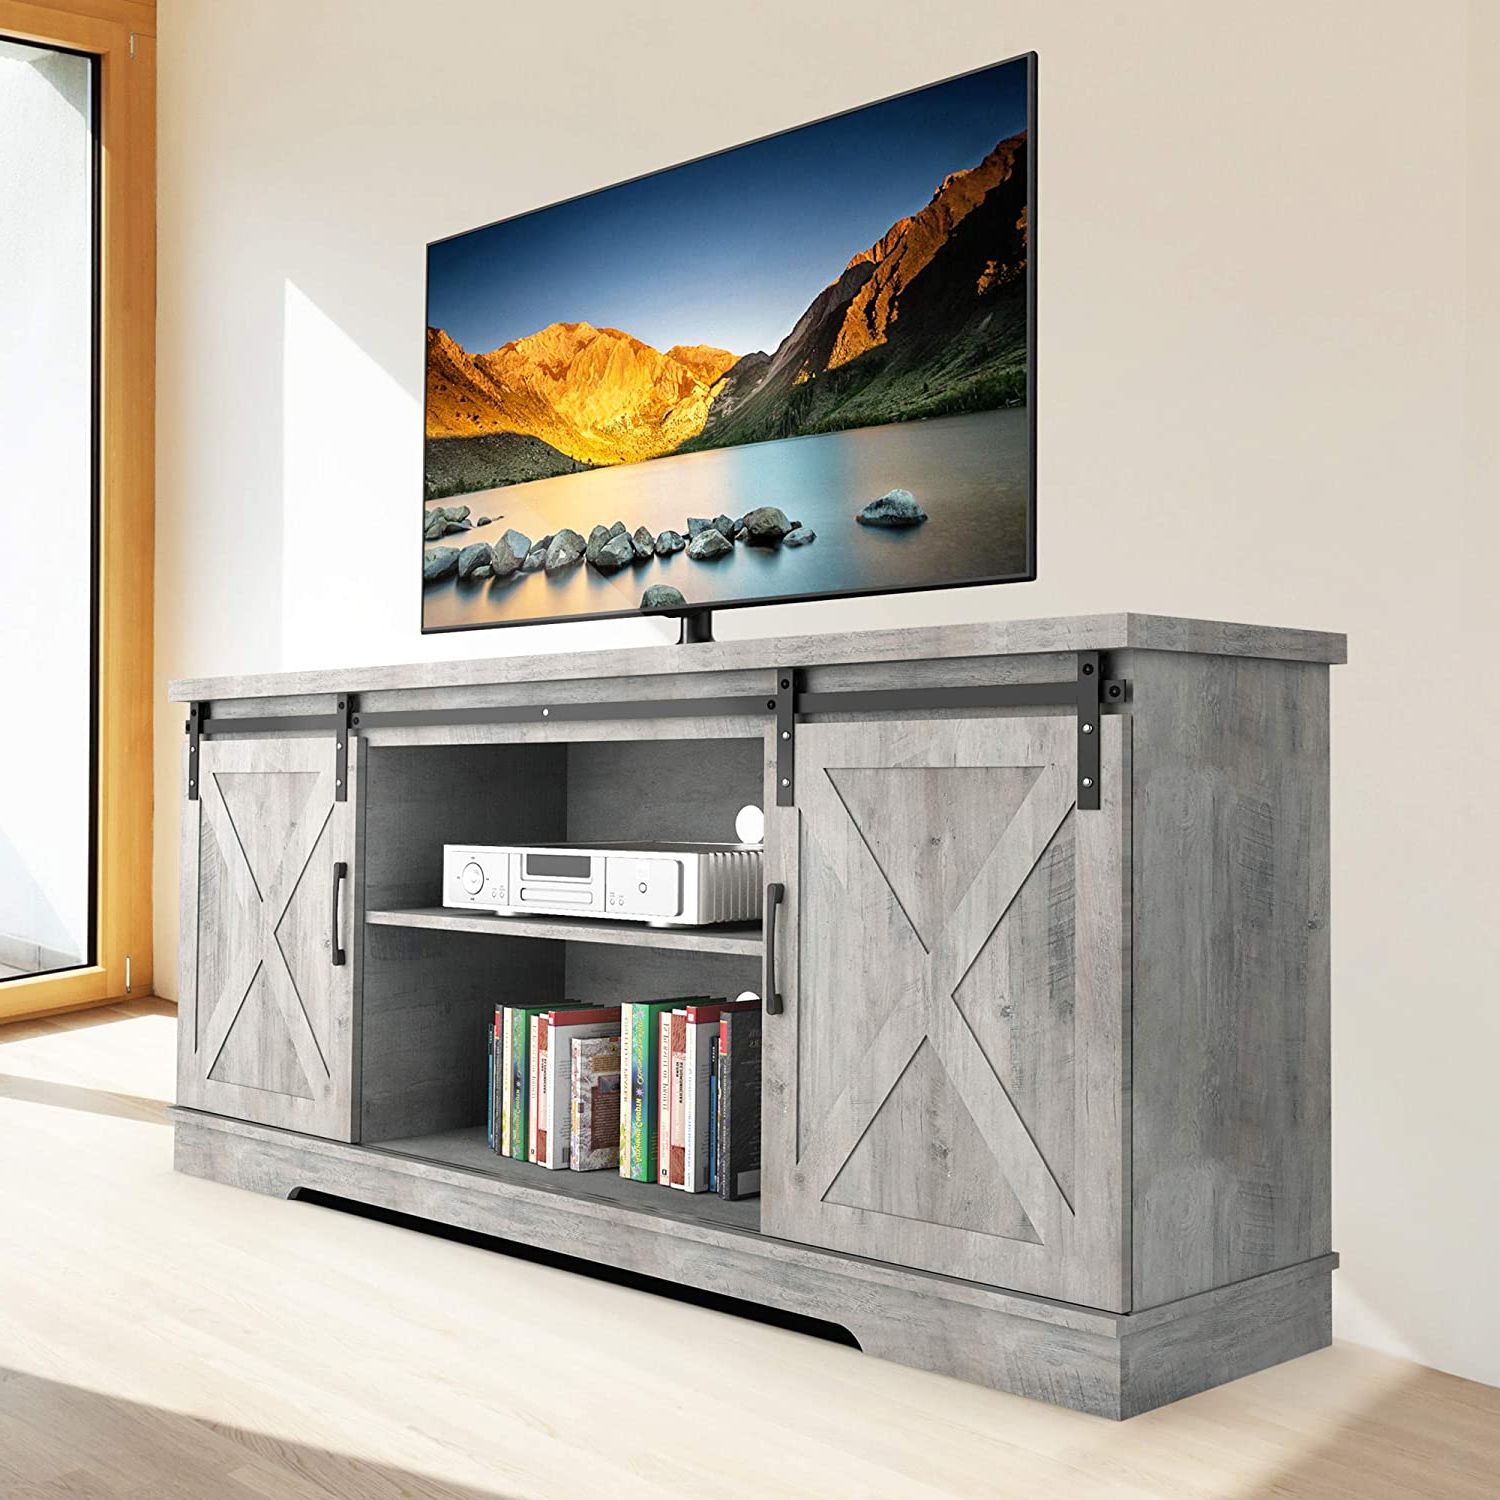 Eastvita Modern Farmhouse Sliding Barn Door Tv Stand For 65" Television,  59" Entertainment Center Tv Console, Home Living Room Storage Table With  Movable Shelf (stone Grey) – Walmart Regarding Current Farmhouse Style Tv Stands (View 6 of 10)